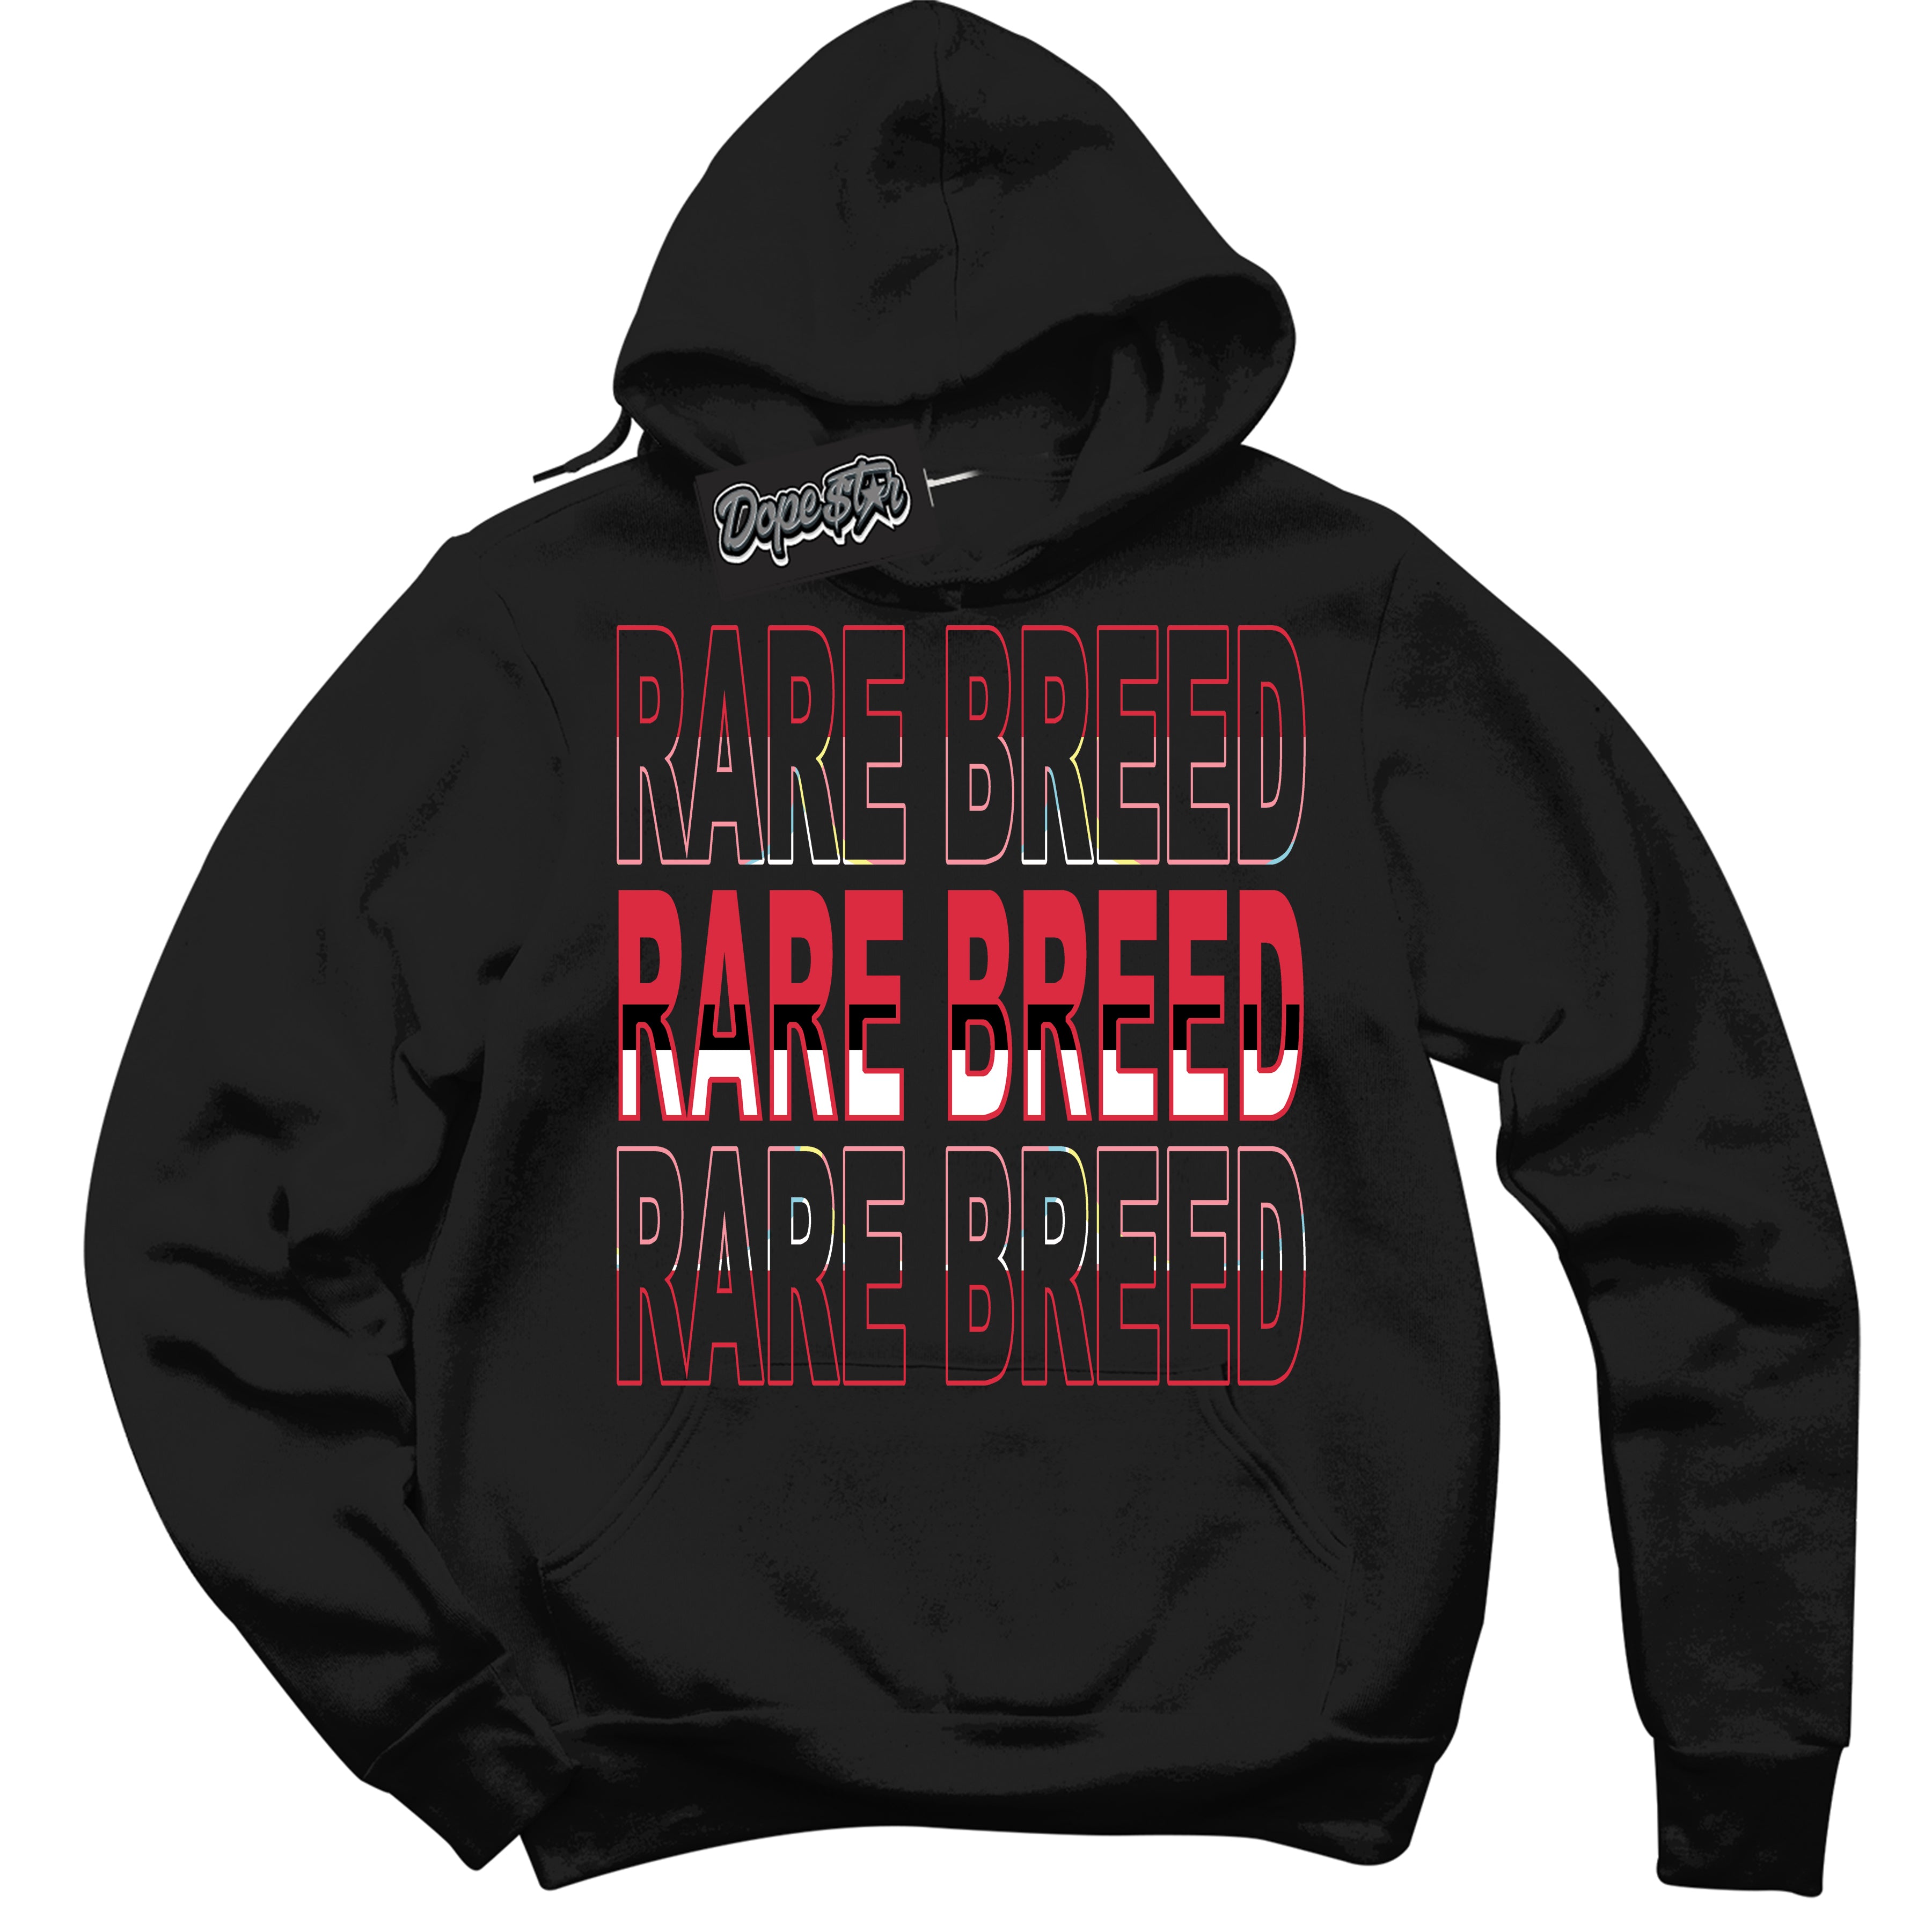 Cool Black Graphic DopeStar Hoodie with “ Rare Breed “ print, that perfectly matches Spider-Verse 1s sneakers